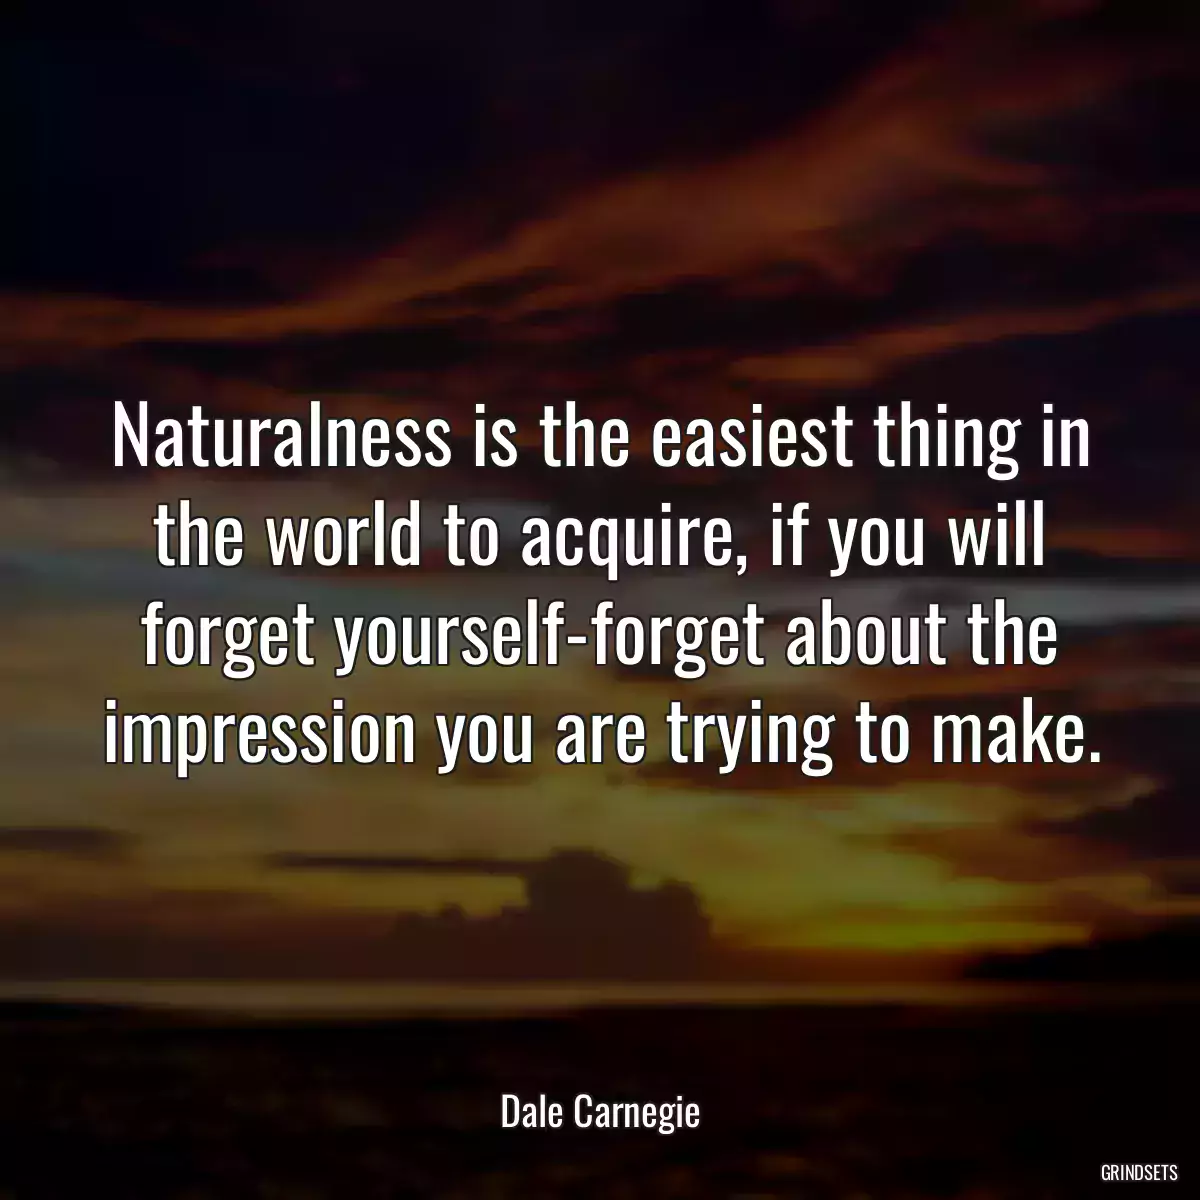 Naturalness is the easiest thing in the world to acquire, if you will forget yourself-forget about the impression you are trying to make.